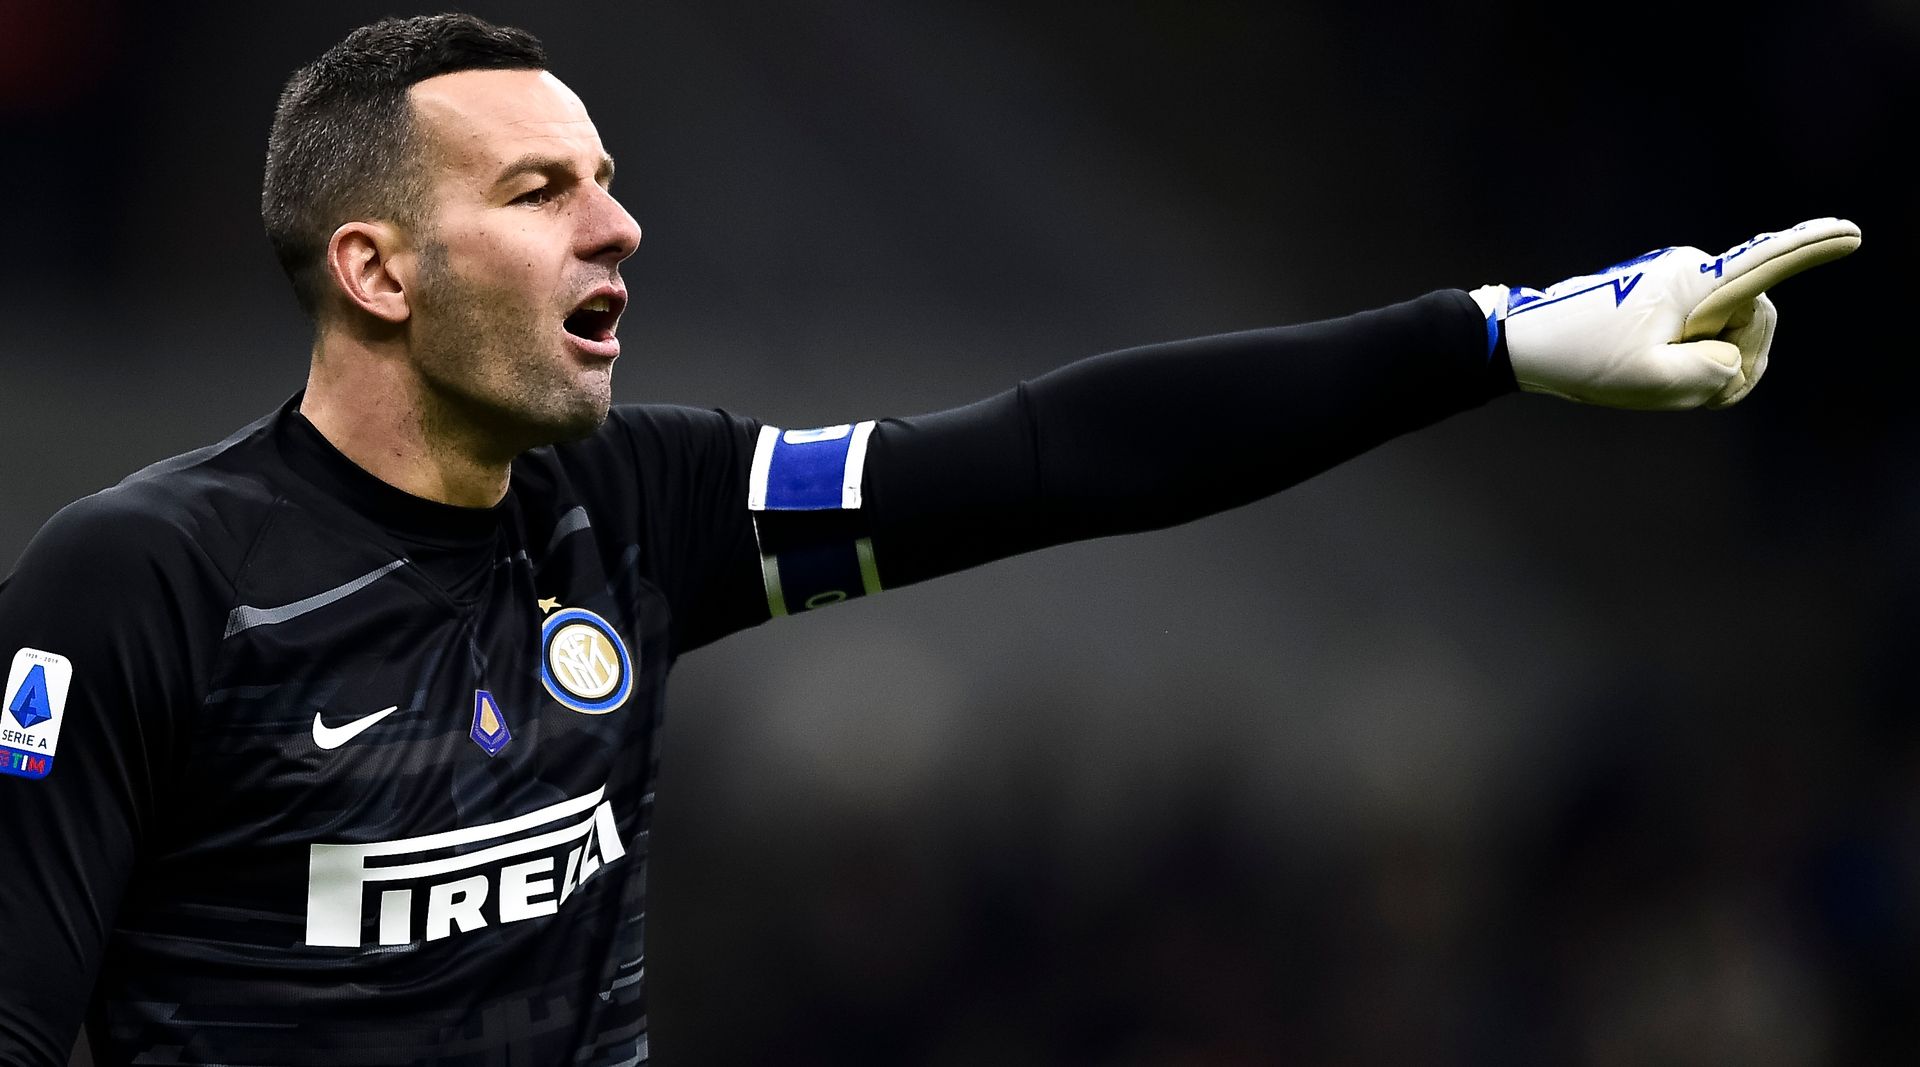 <p>                     Brought to Inter Milan from Udinese in 2012, Samir Handanovic established himself as one of the best goalkeepers in Europe during the 10s.                   </p>                                      <p>                     Among a handful of non-Italians to win Serie A Goalkeeper of the Year – which he did in 2011, 2013 and 2019 – the acrobatic six-foot-four Slovenian was named Inter captain in 2019.                   </p>